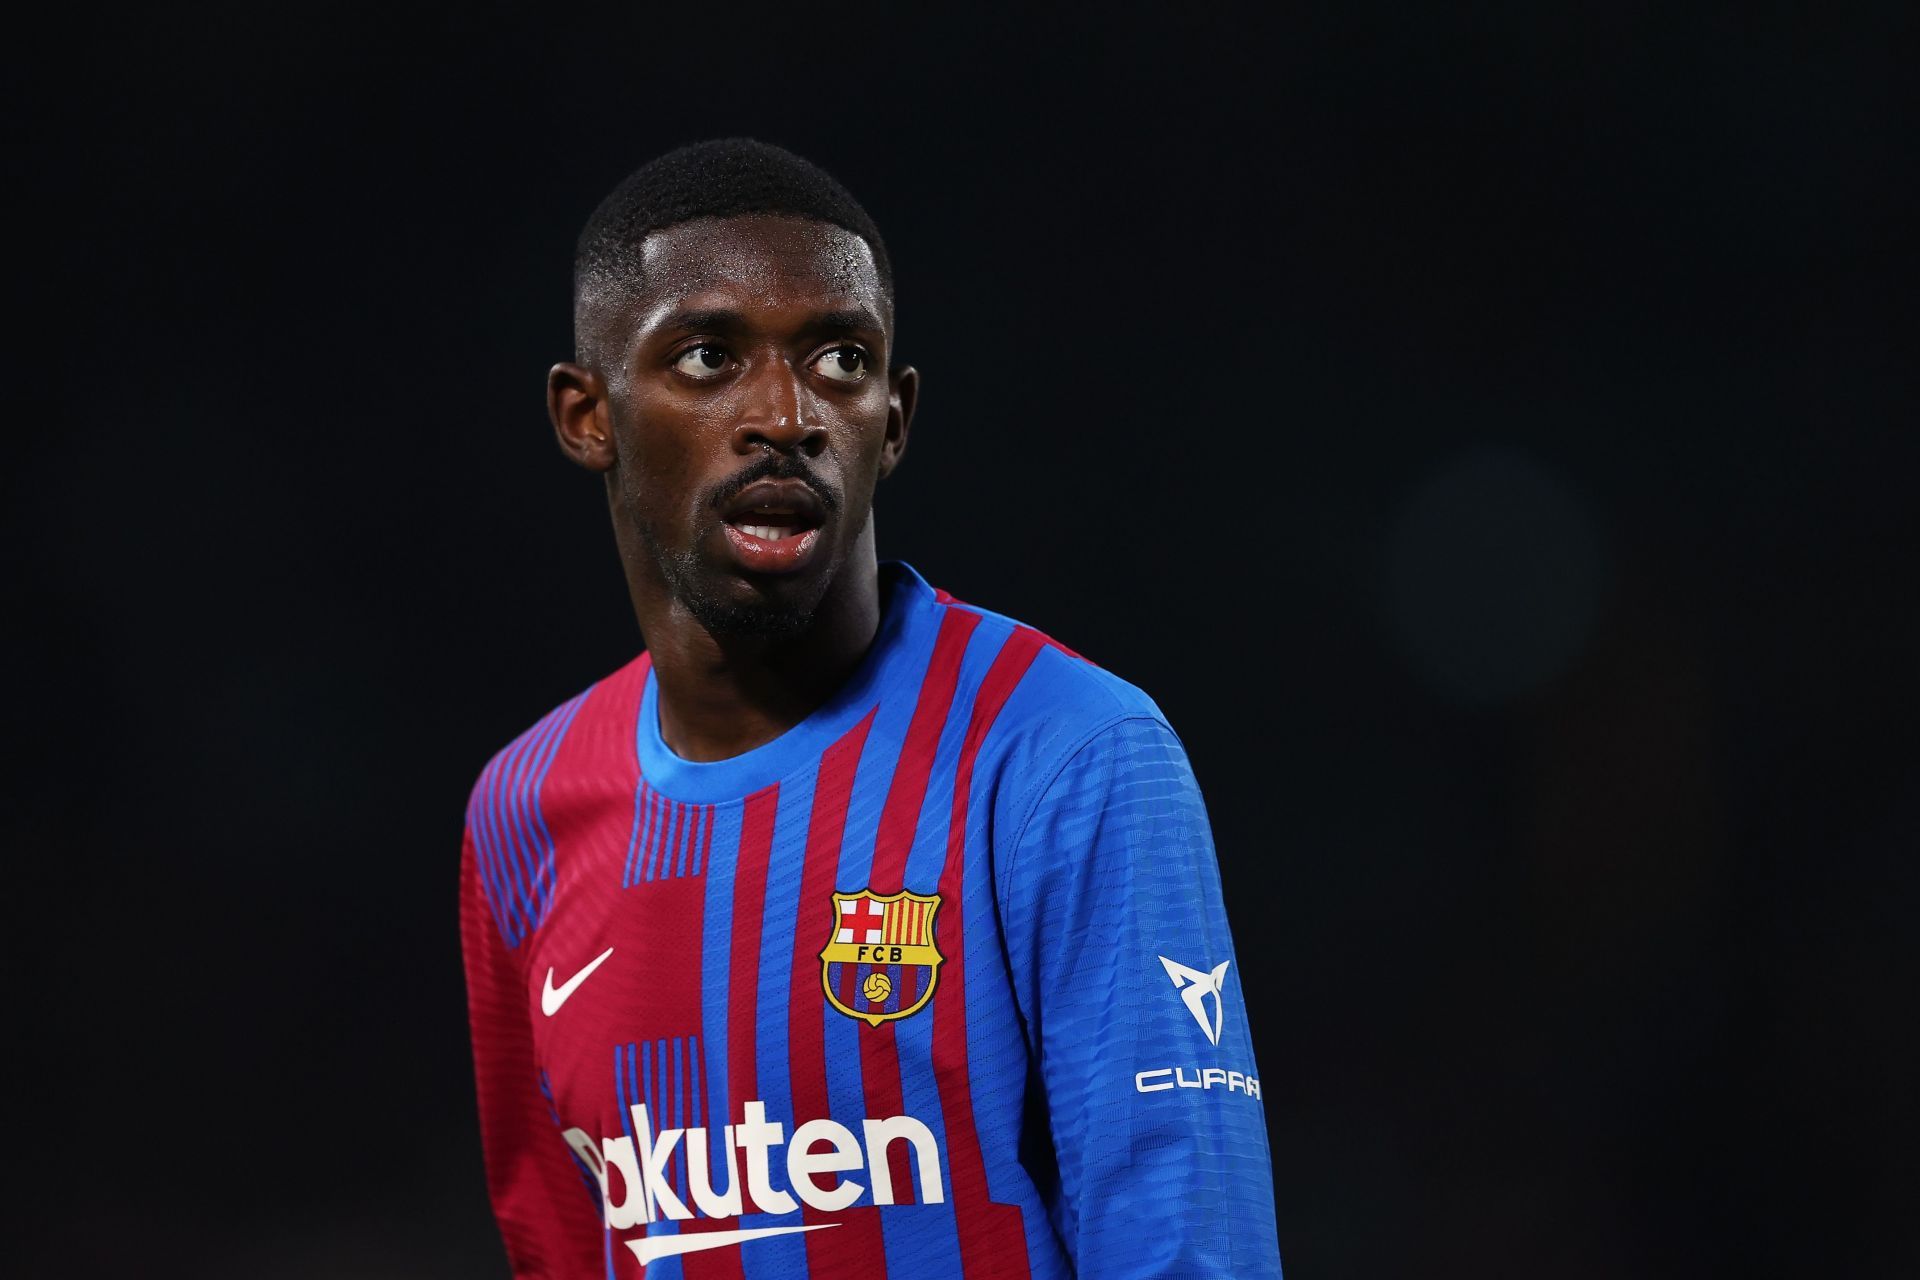 Ousmane Dembele could leave the Camp Nou this summer.